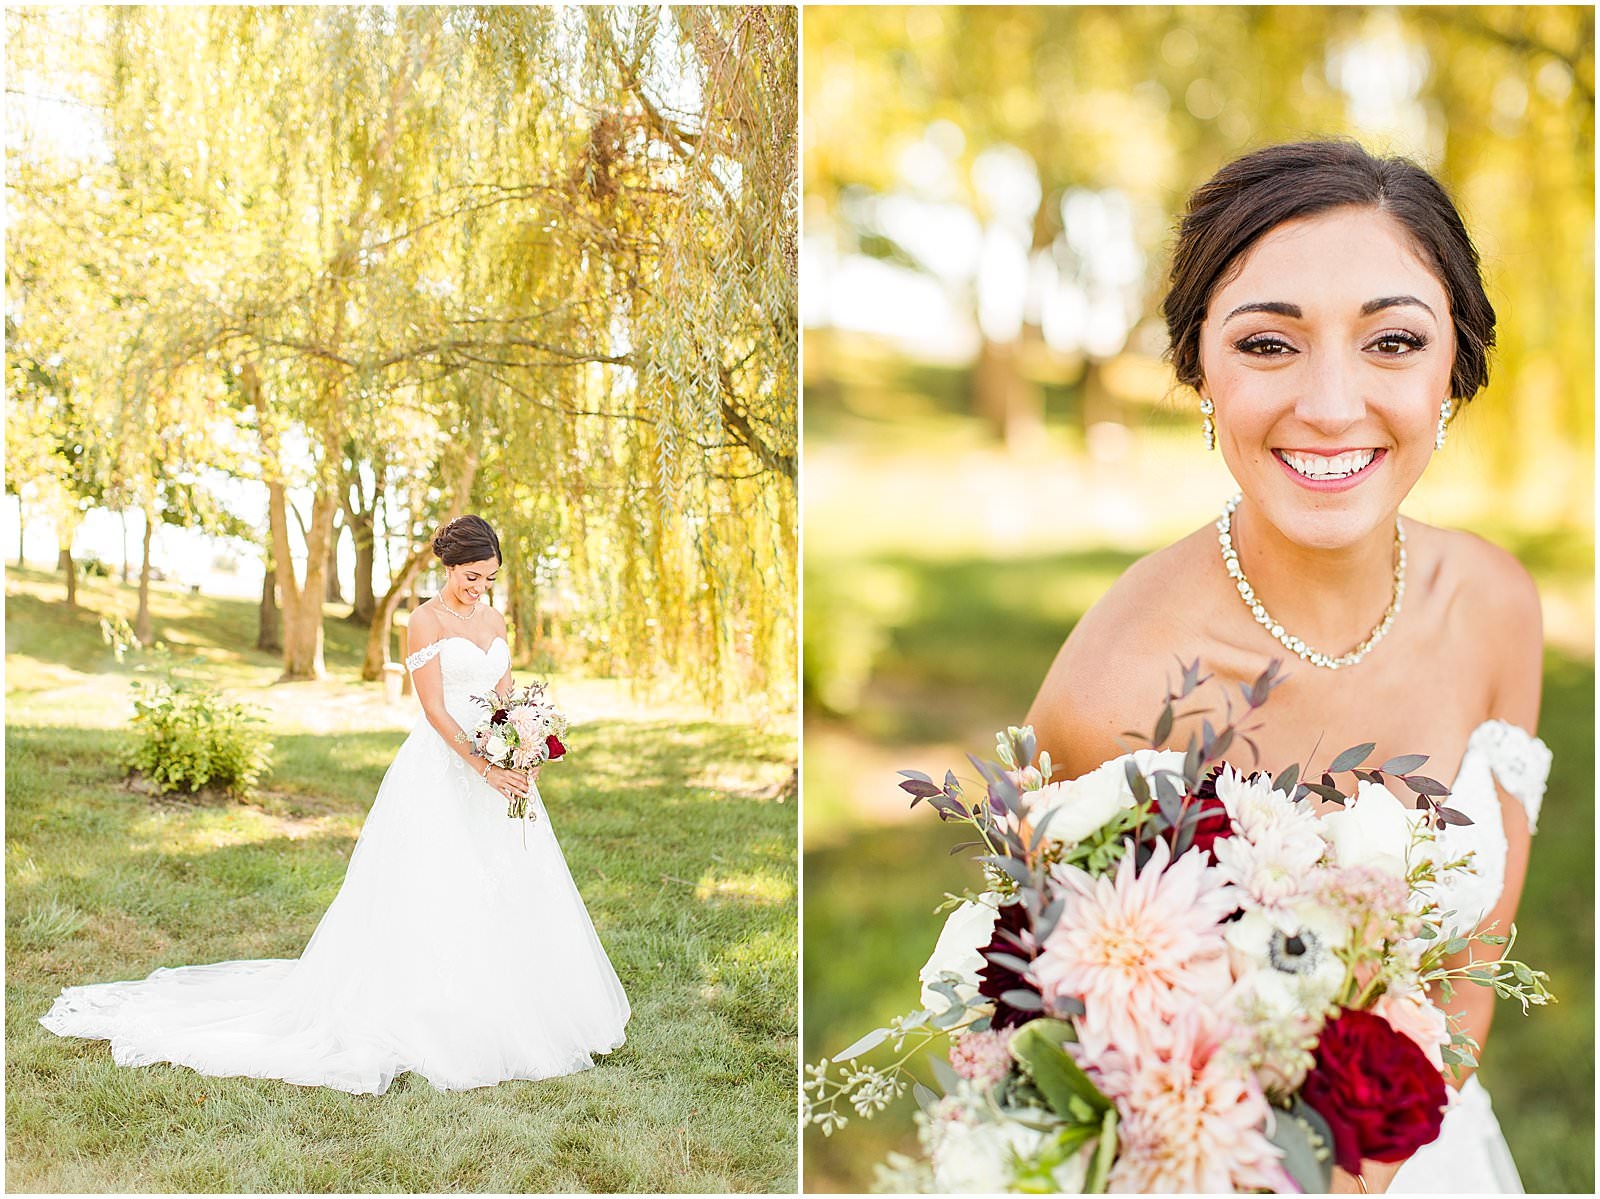 A Stunning Fall Wedding in Indianapolis, IN |. Sally and Andrew | Bret and Brandie Photography 0091.jpg